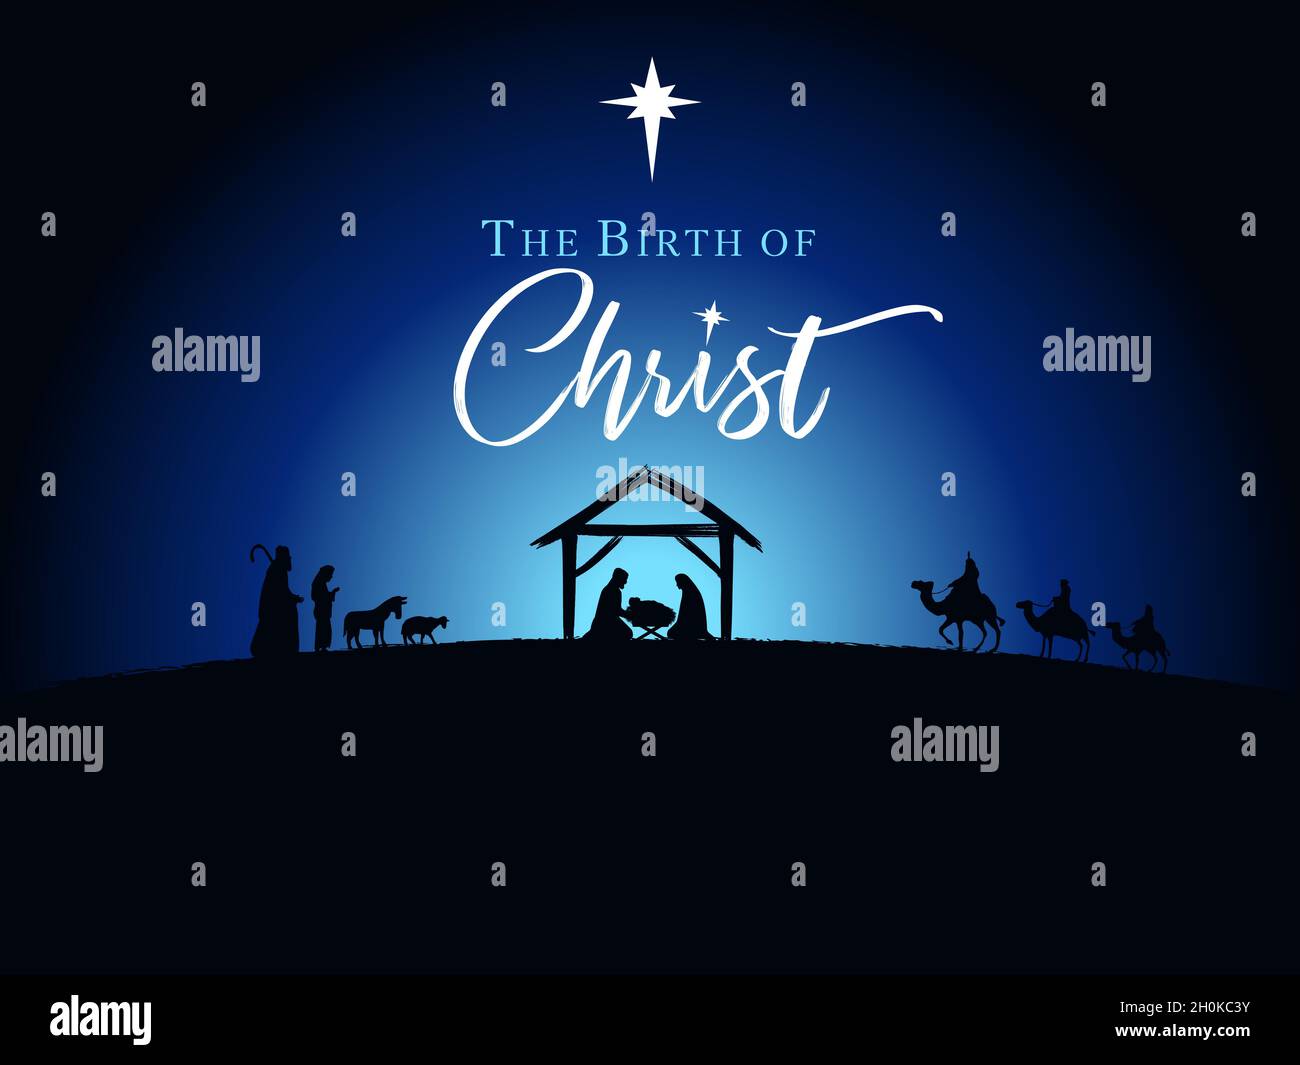 The Birth of Christ with shepherds and wise man. Nativity scene, silhouette Jesus in manger on night sky background. Christmas story Mary Joseph and b Stock Vector